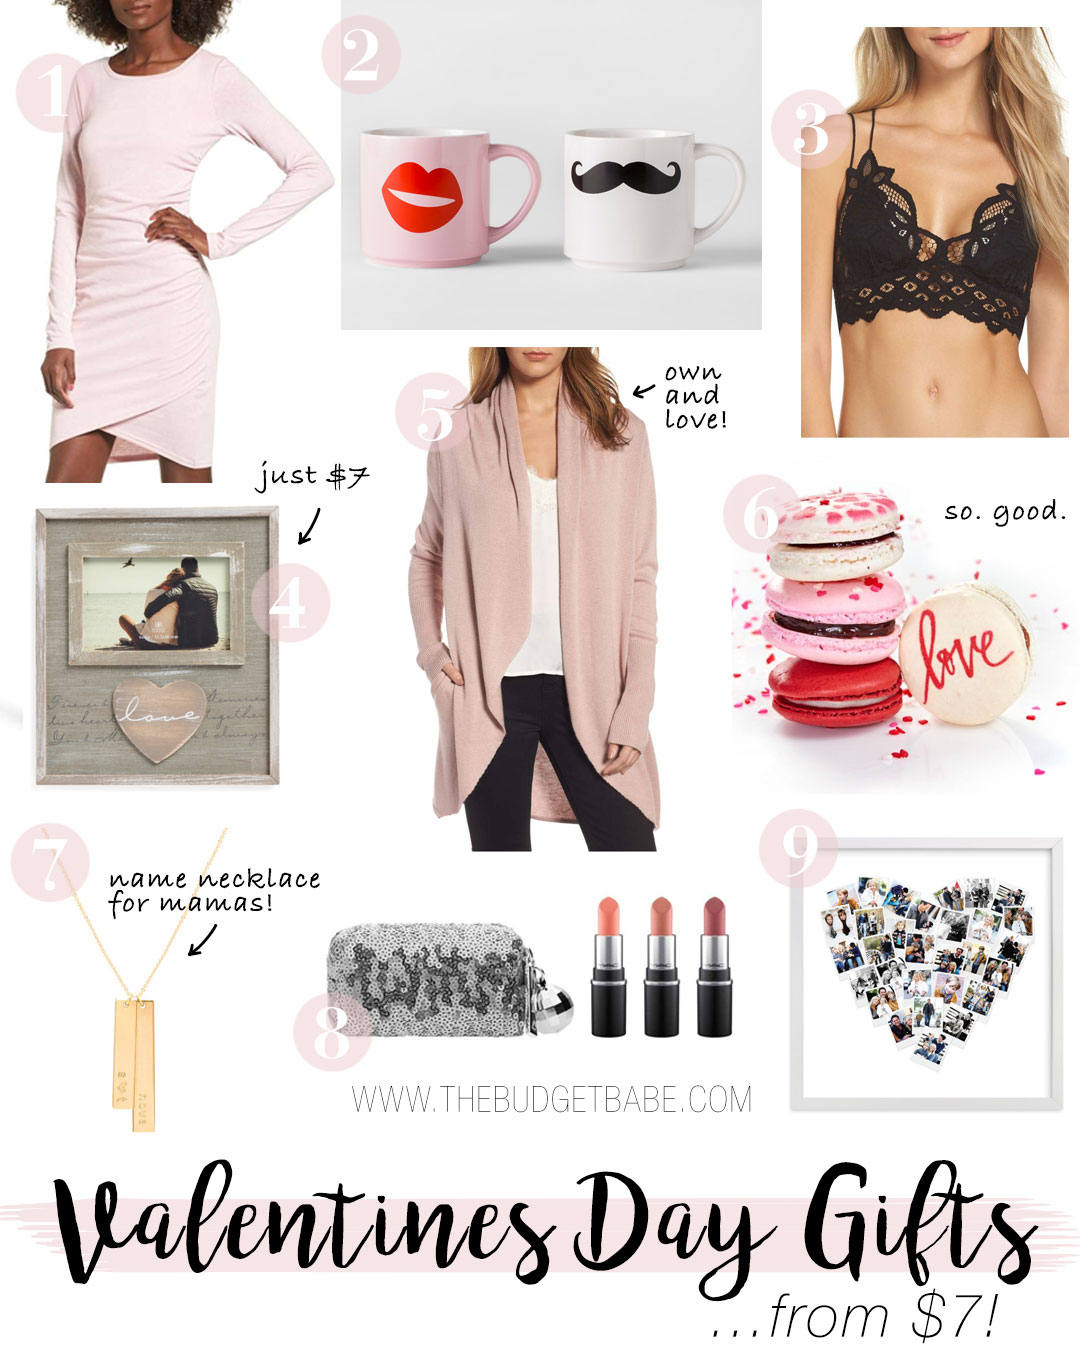 Valentine's Day gift guide from The Budget Babe